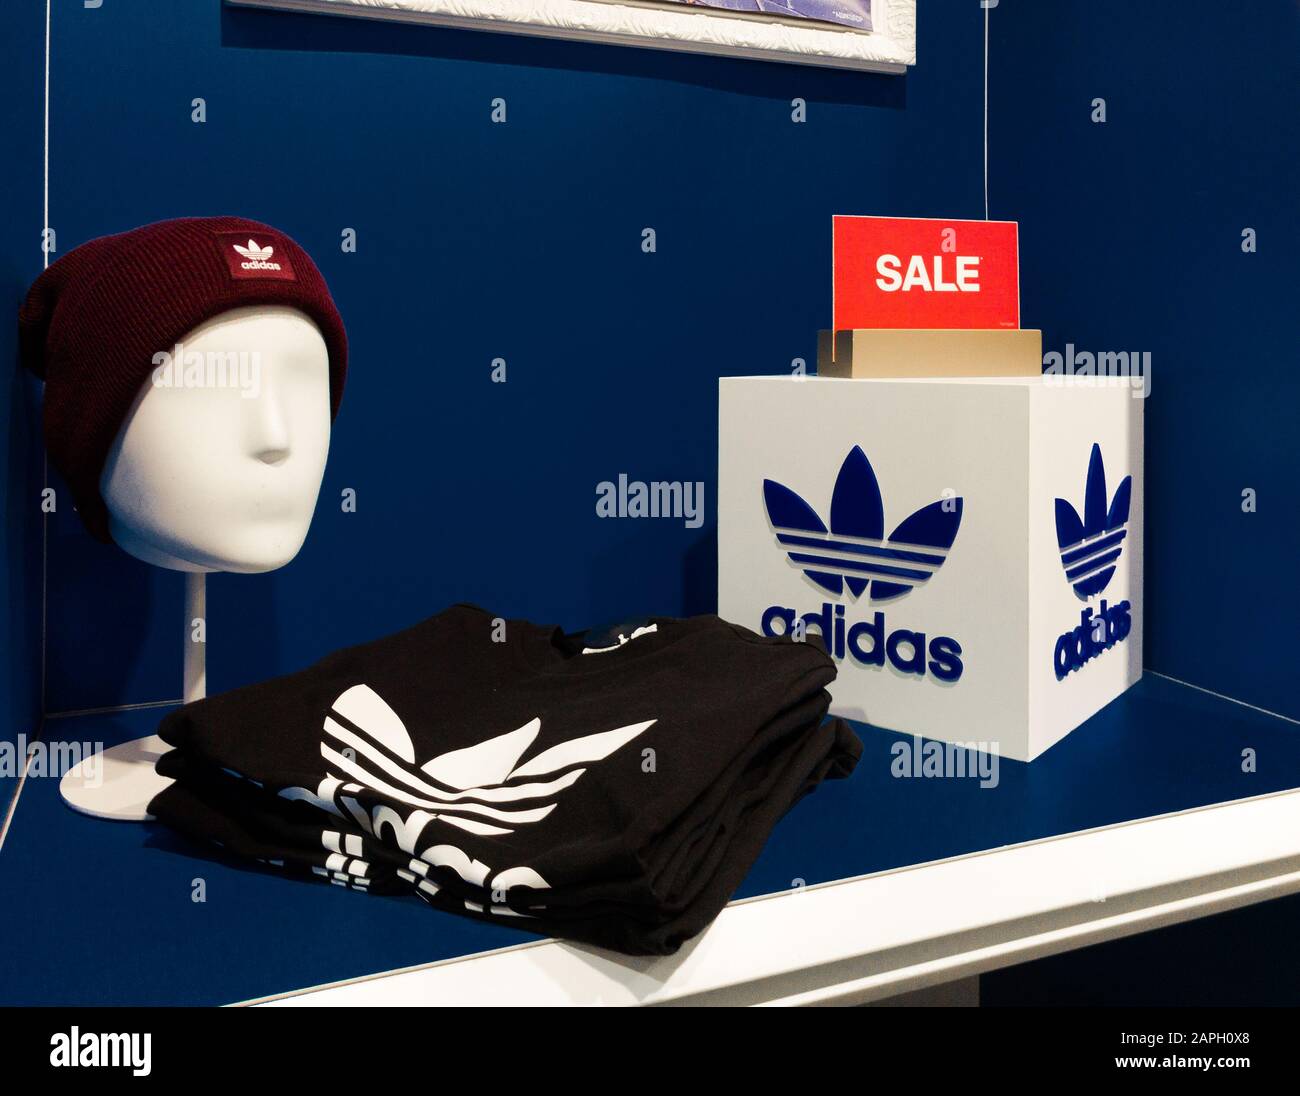 decoration items layd out in the Adidas shop Stock Photo - Alamy